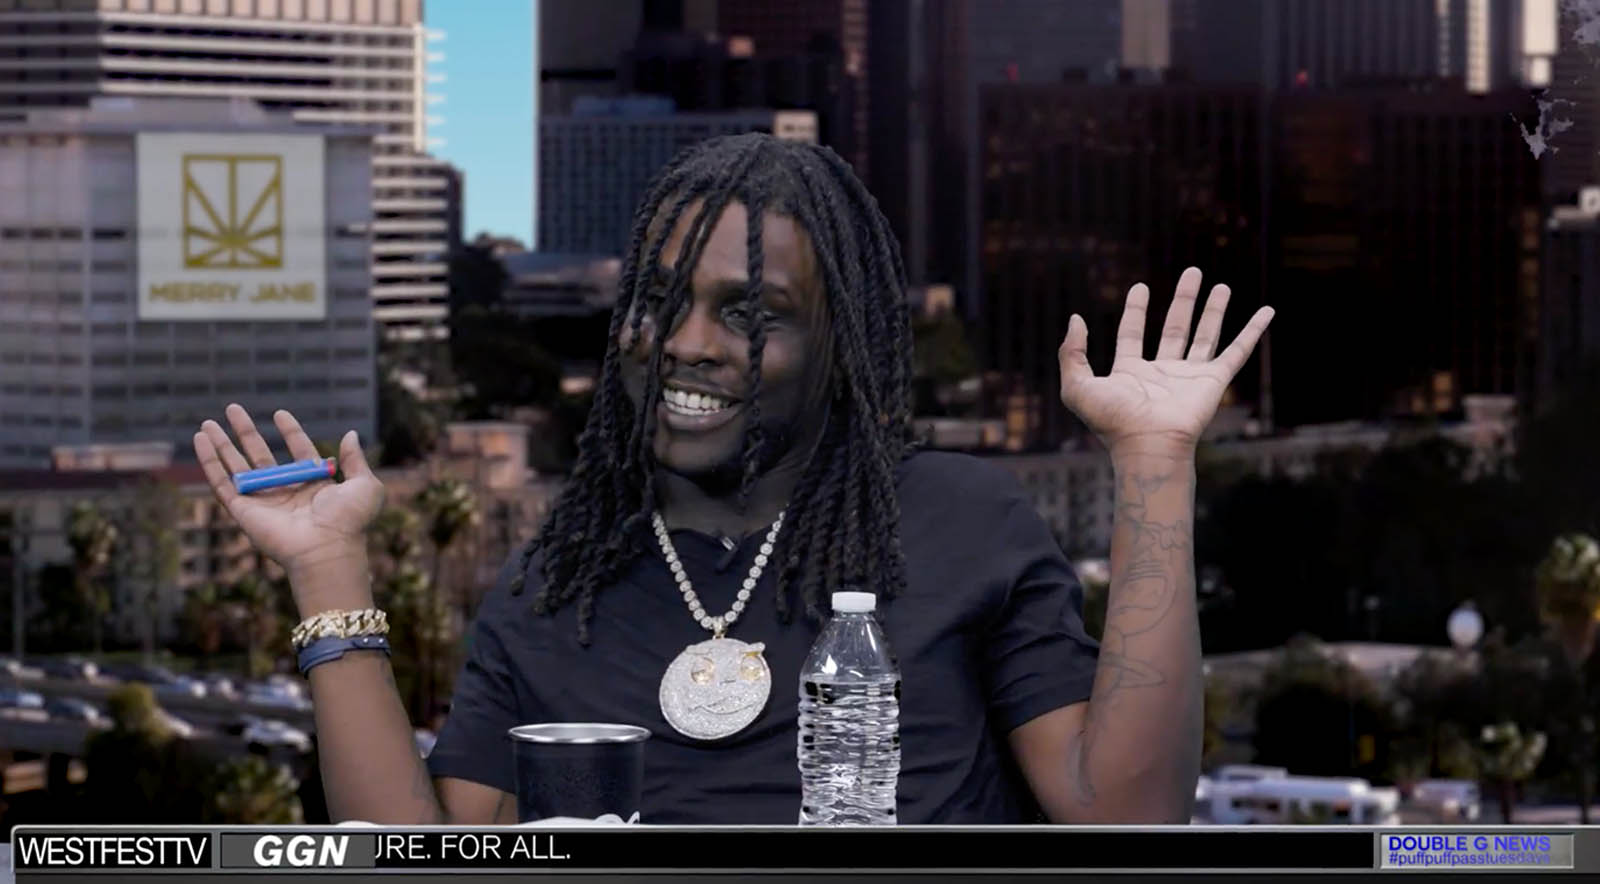 Chief Keef Talks Chicago, Collabs with Kanye, and Why Ice Cream is Still “The Shit”